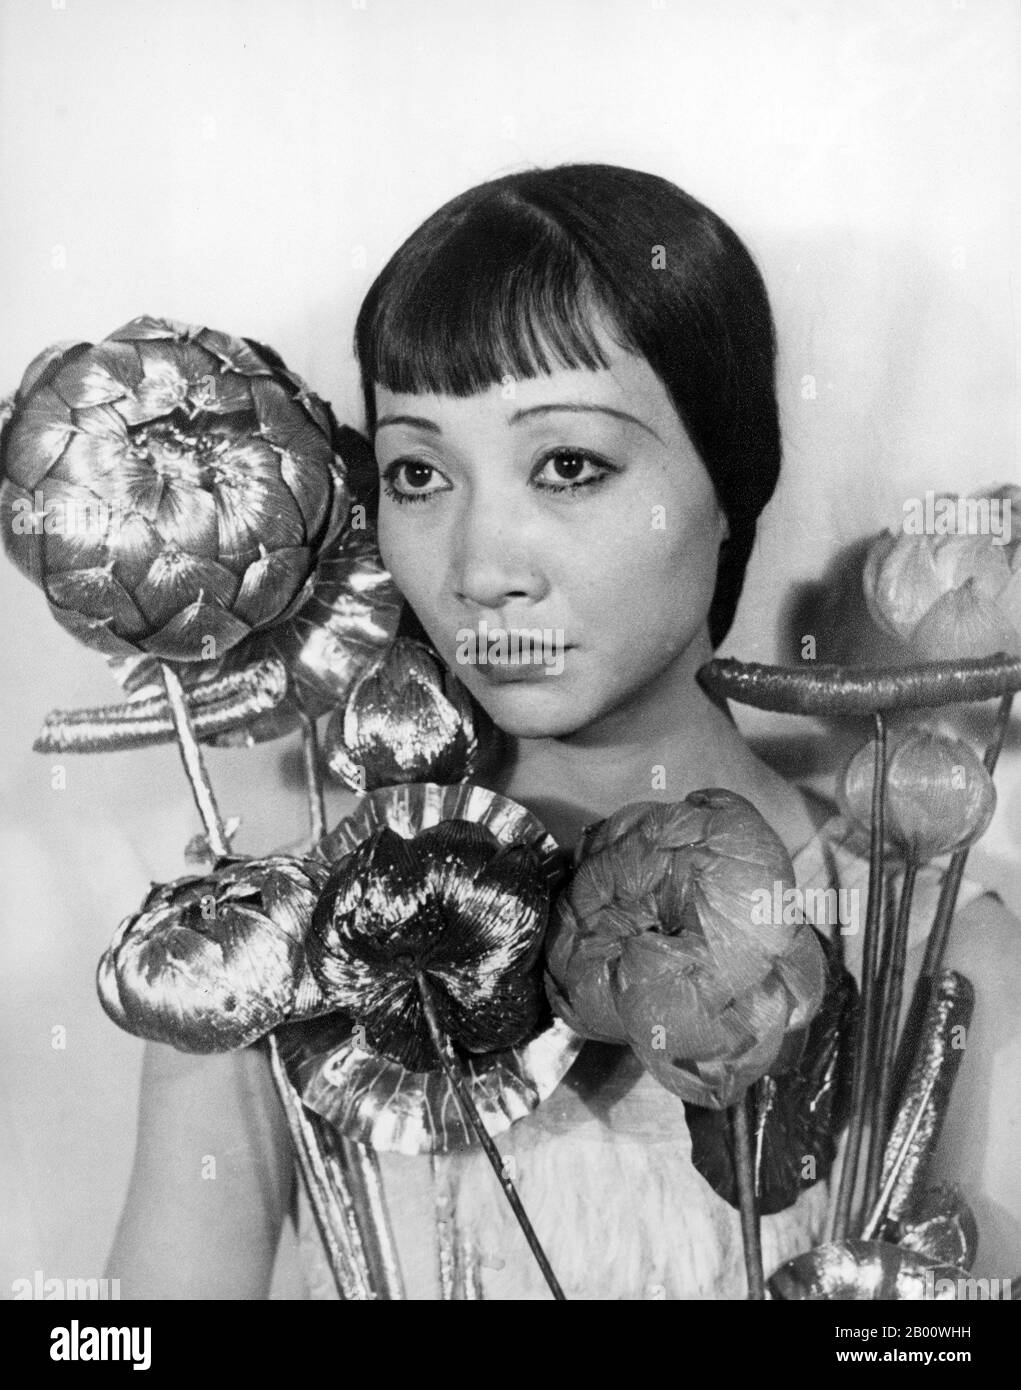 USA: Anna May Wong photographed by Carl Van Vechten (1880-1964), 22 September 1935.  Anna May Wong (January 3, 1905 – February 3, 1961) was an American actress, the first Chinese American movie star, and the first Asian American to become an international star. Her long and varied career spanned both silent and sound film, television, stage, and radio. Stock Photo